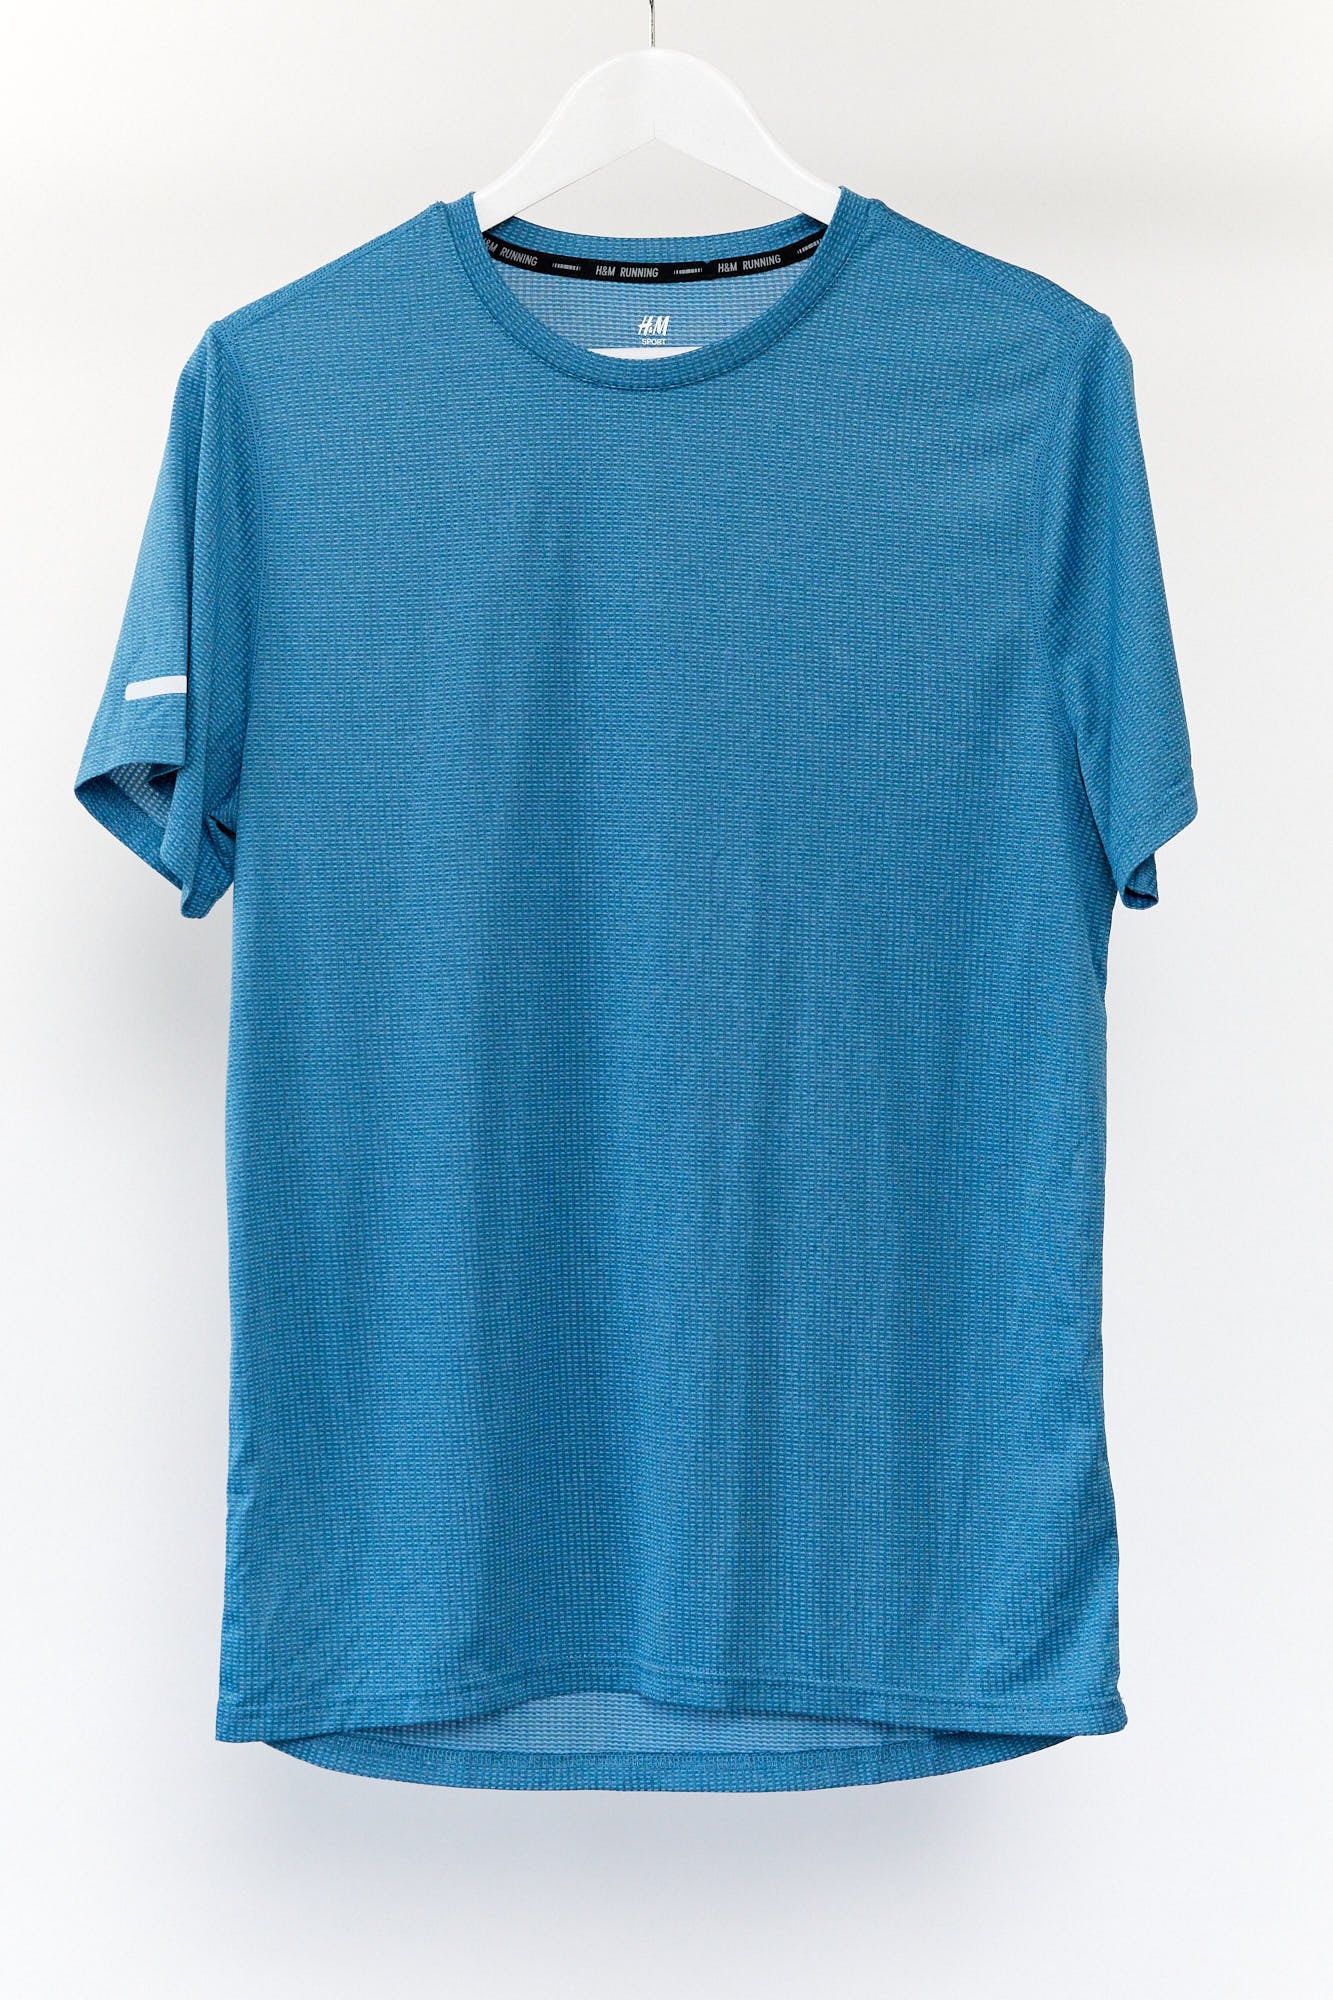 Mens Blue H&M Sport Top Size Small